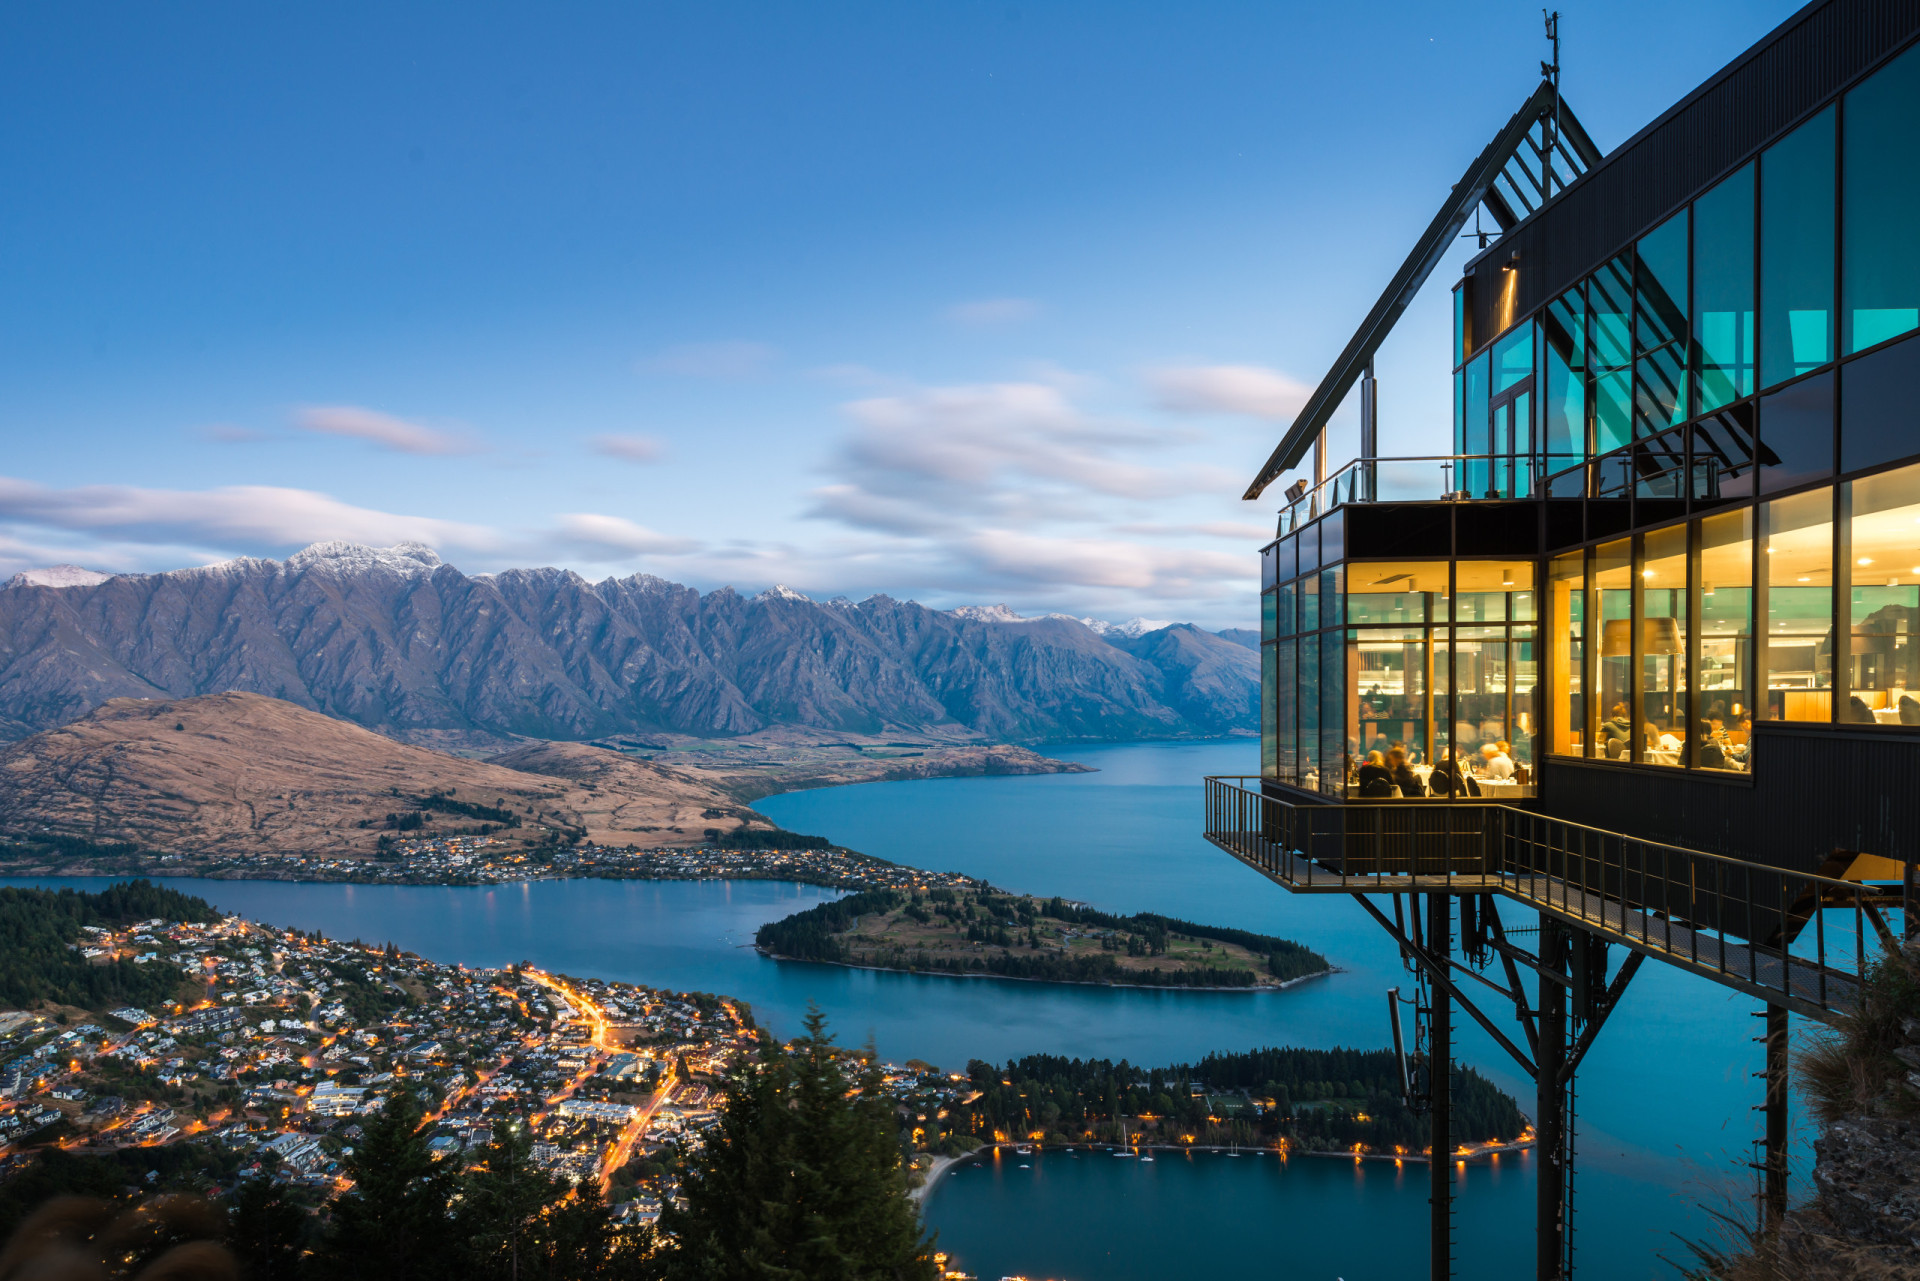 <p>Travelers visiting New Zealand have to pay an International Visitor Conservation and Tourism Levy (IVL), which costs US$23.94.</p><p><a href="https://www.msn.com/en-ph/community/channel/vid-7xx8mnucu55yw63we9va2gwr7uihbxwc68fxqp25x6tg4ftibpra?cvid=94631541bc0f4f89bfd59158d696ad7e">Follow us and access great exclusive content every day</a></p>